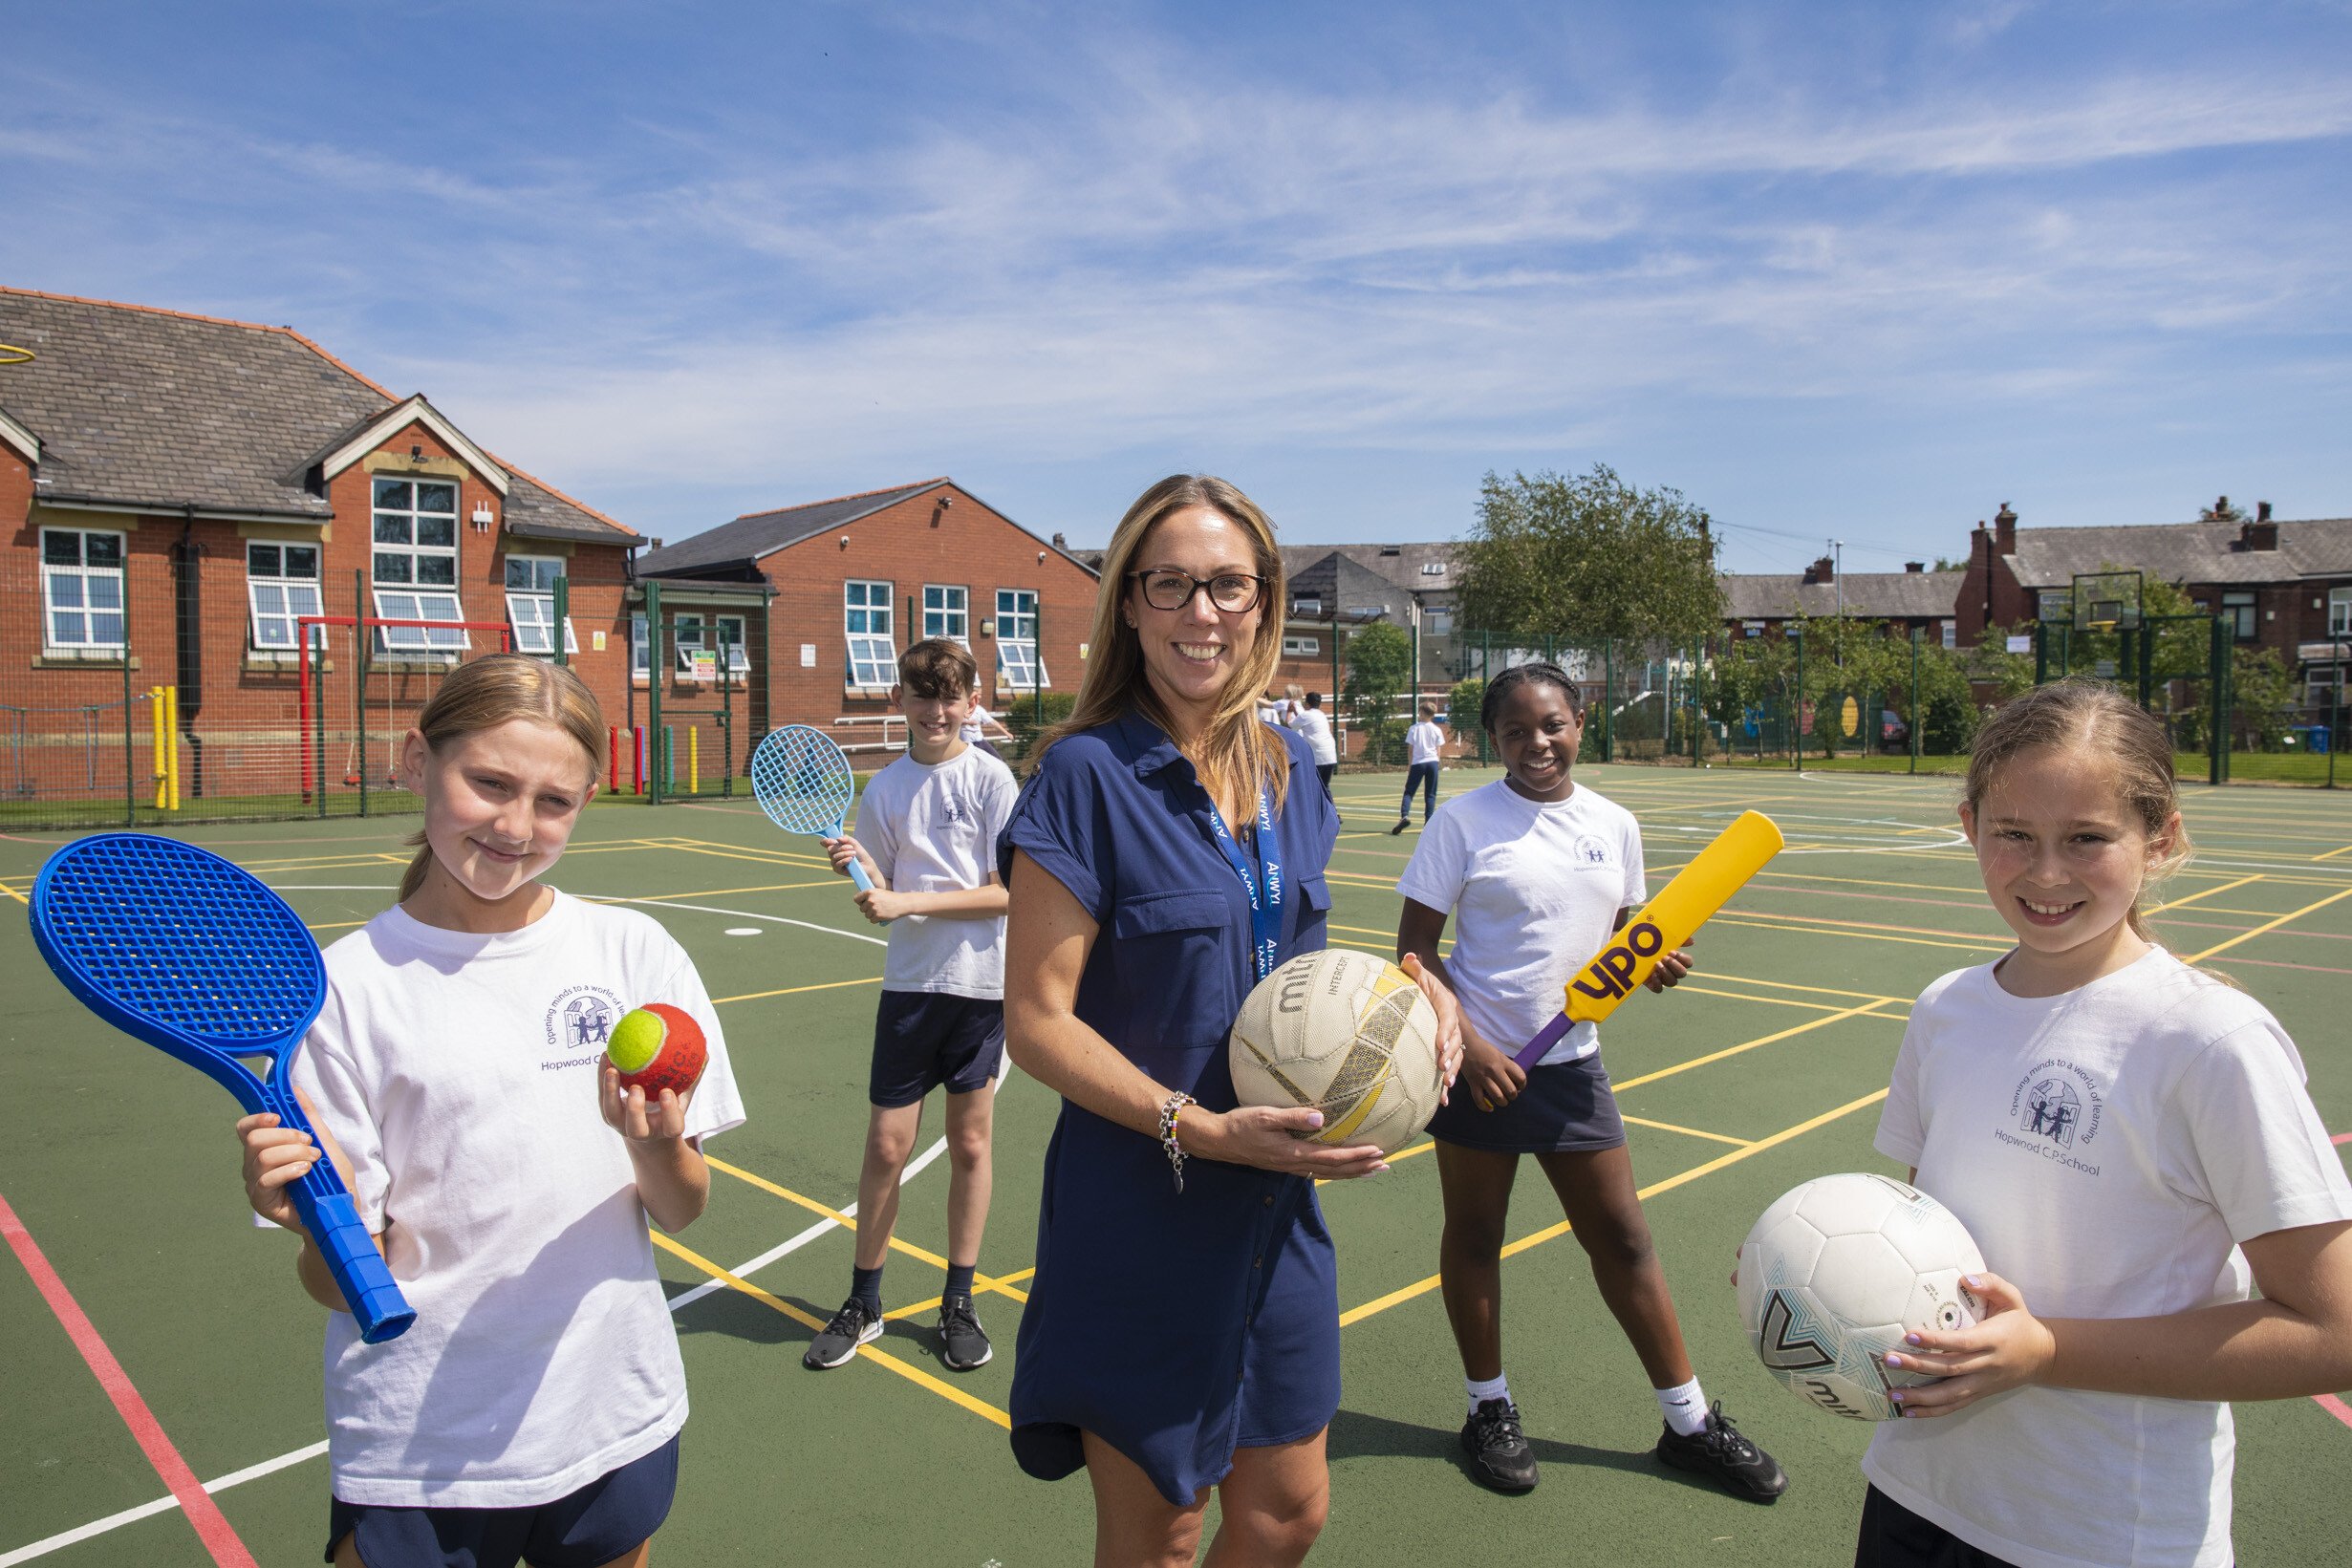 1.	Anwyl funding has helped Hopwood Primary School improve a multi-use games area. Anwyl area sales manager Amy Houlihan is pictured with pupils Summer, Bobby, Ese and Grace